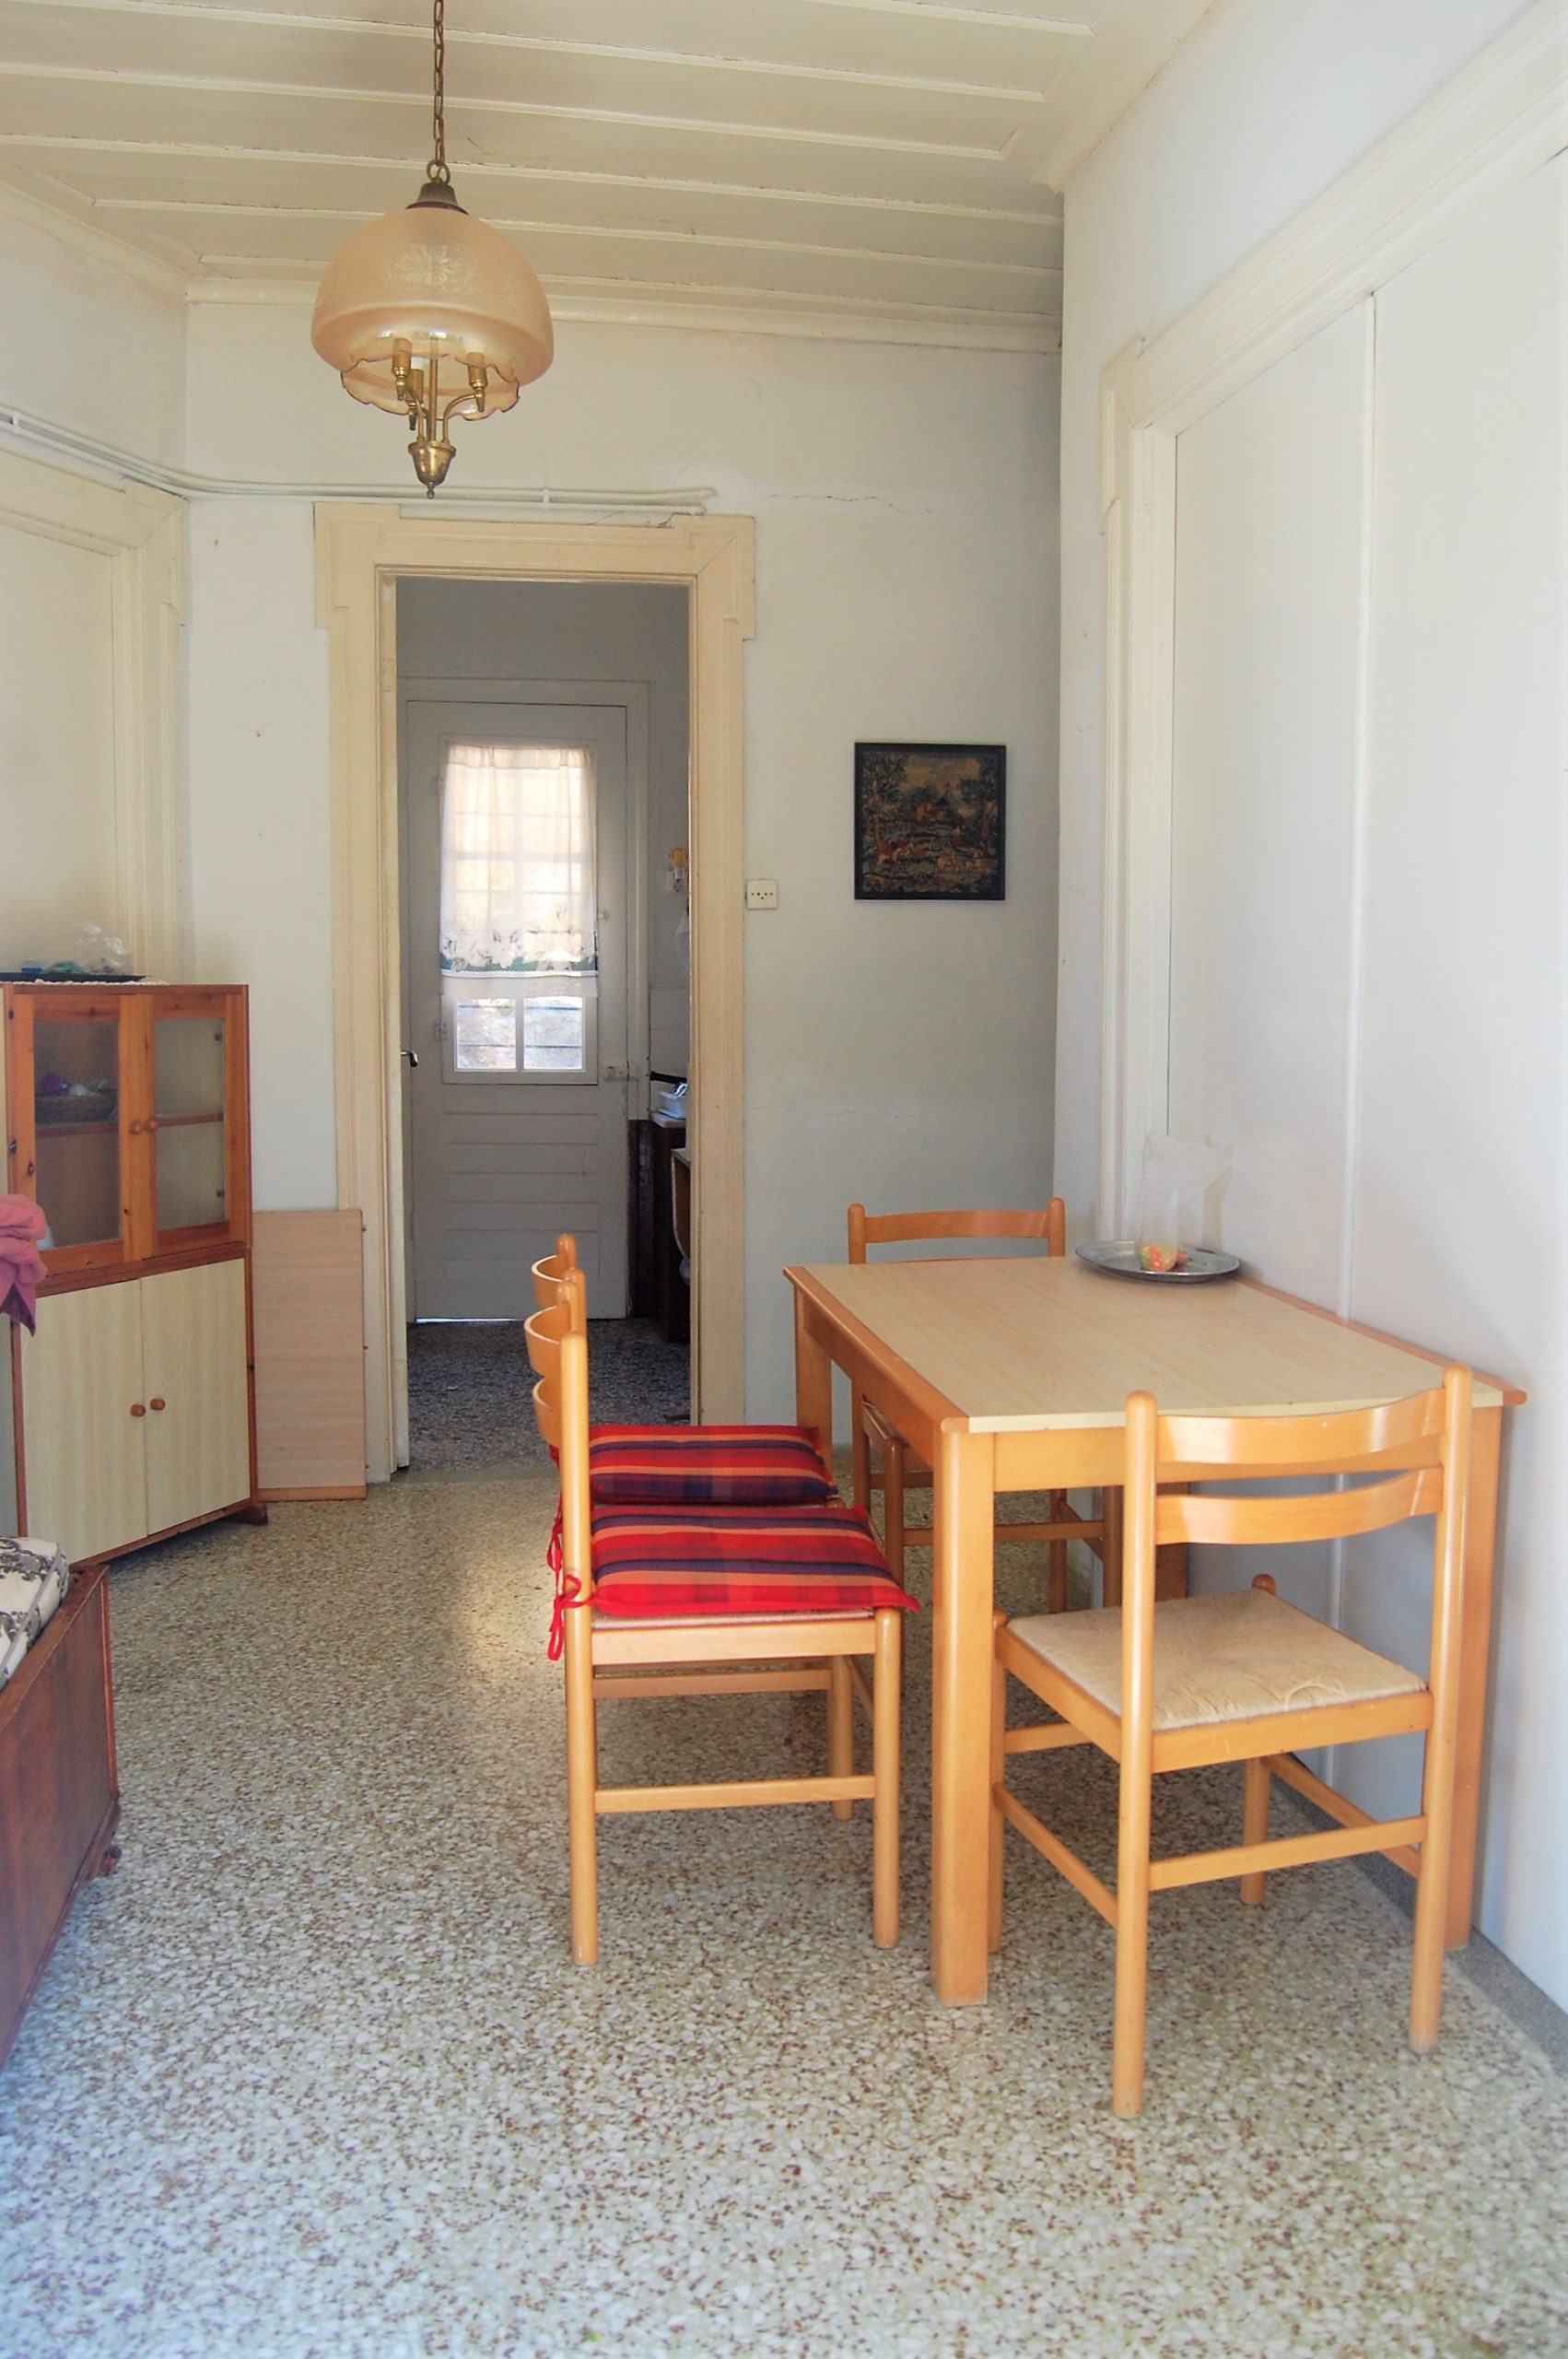 Living room area of house for sale Ithaca Greece, Vathi